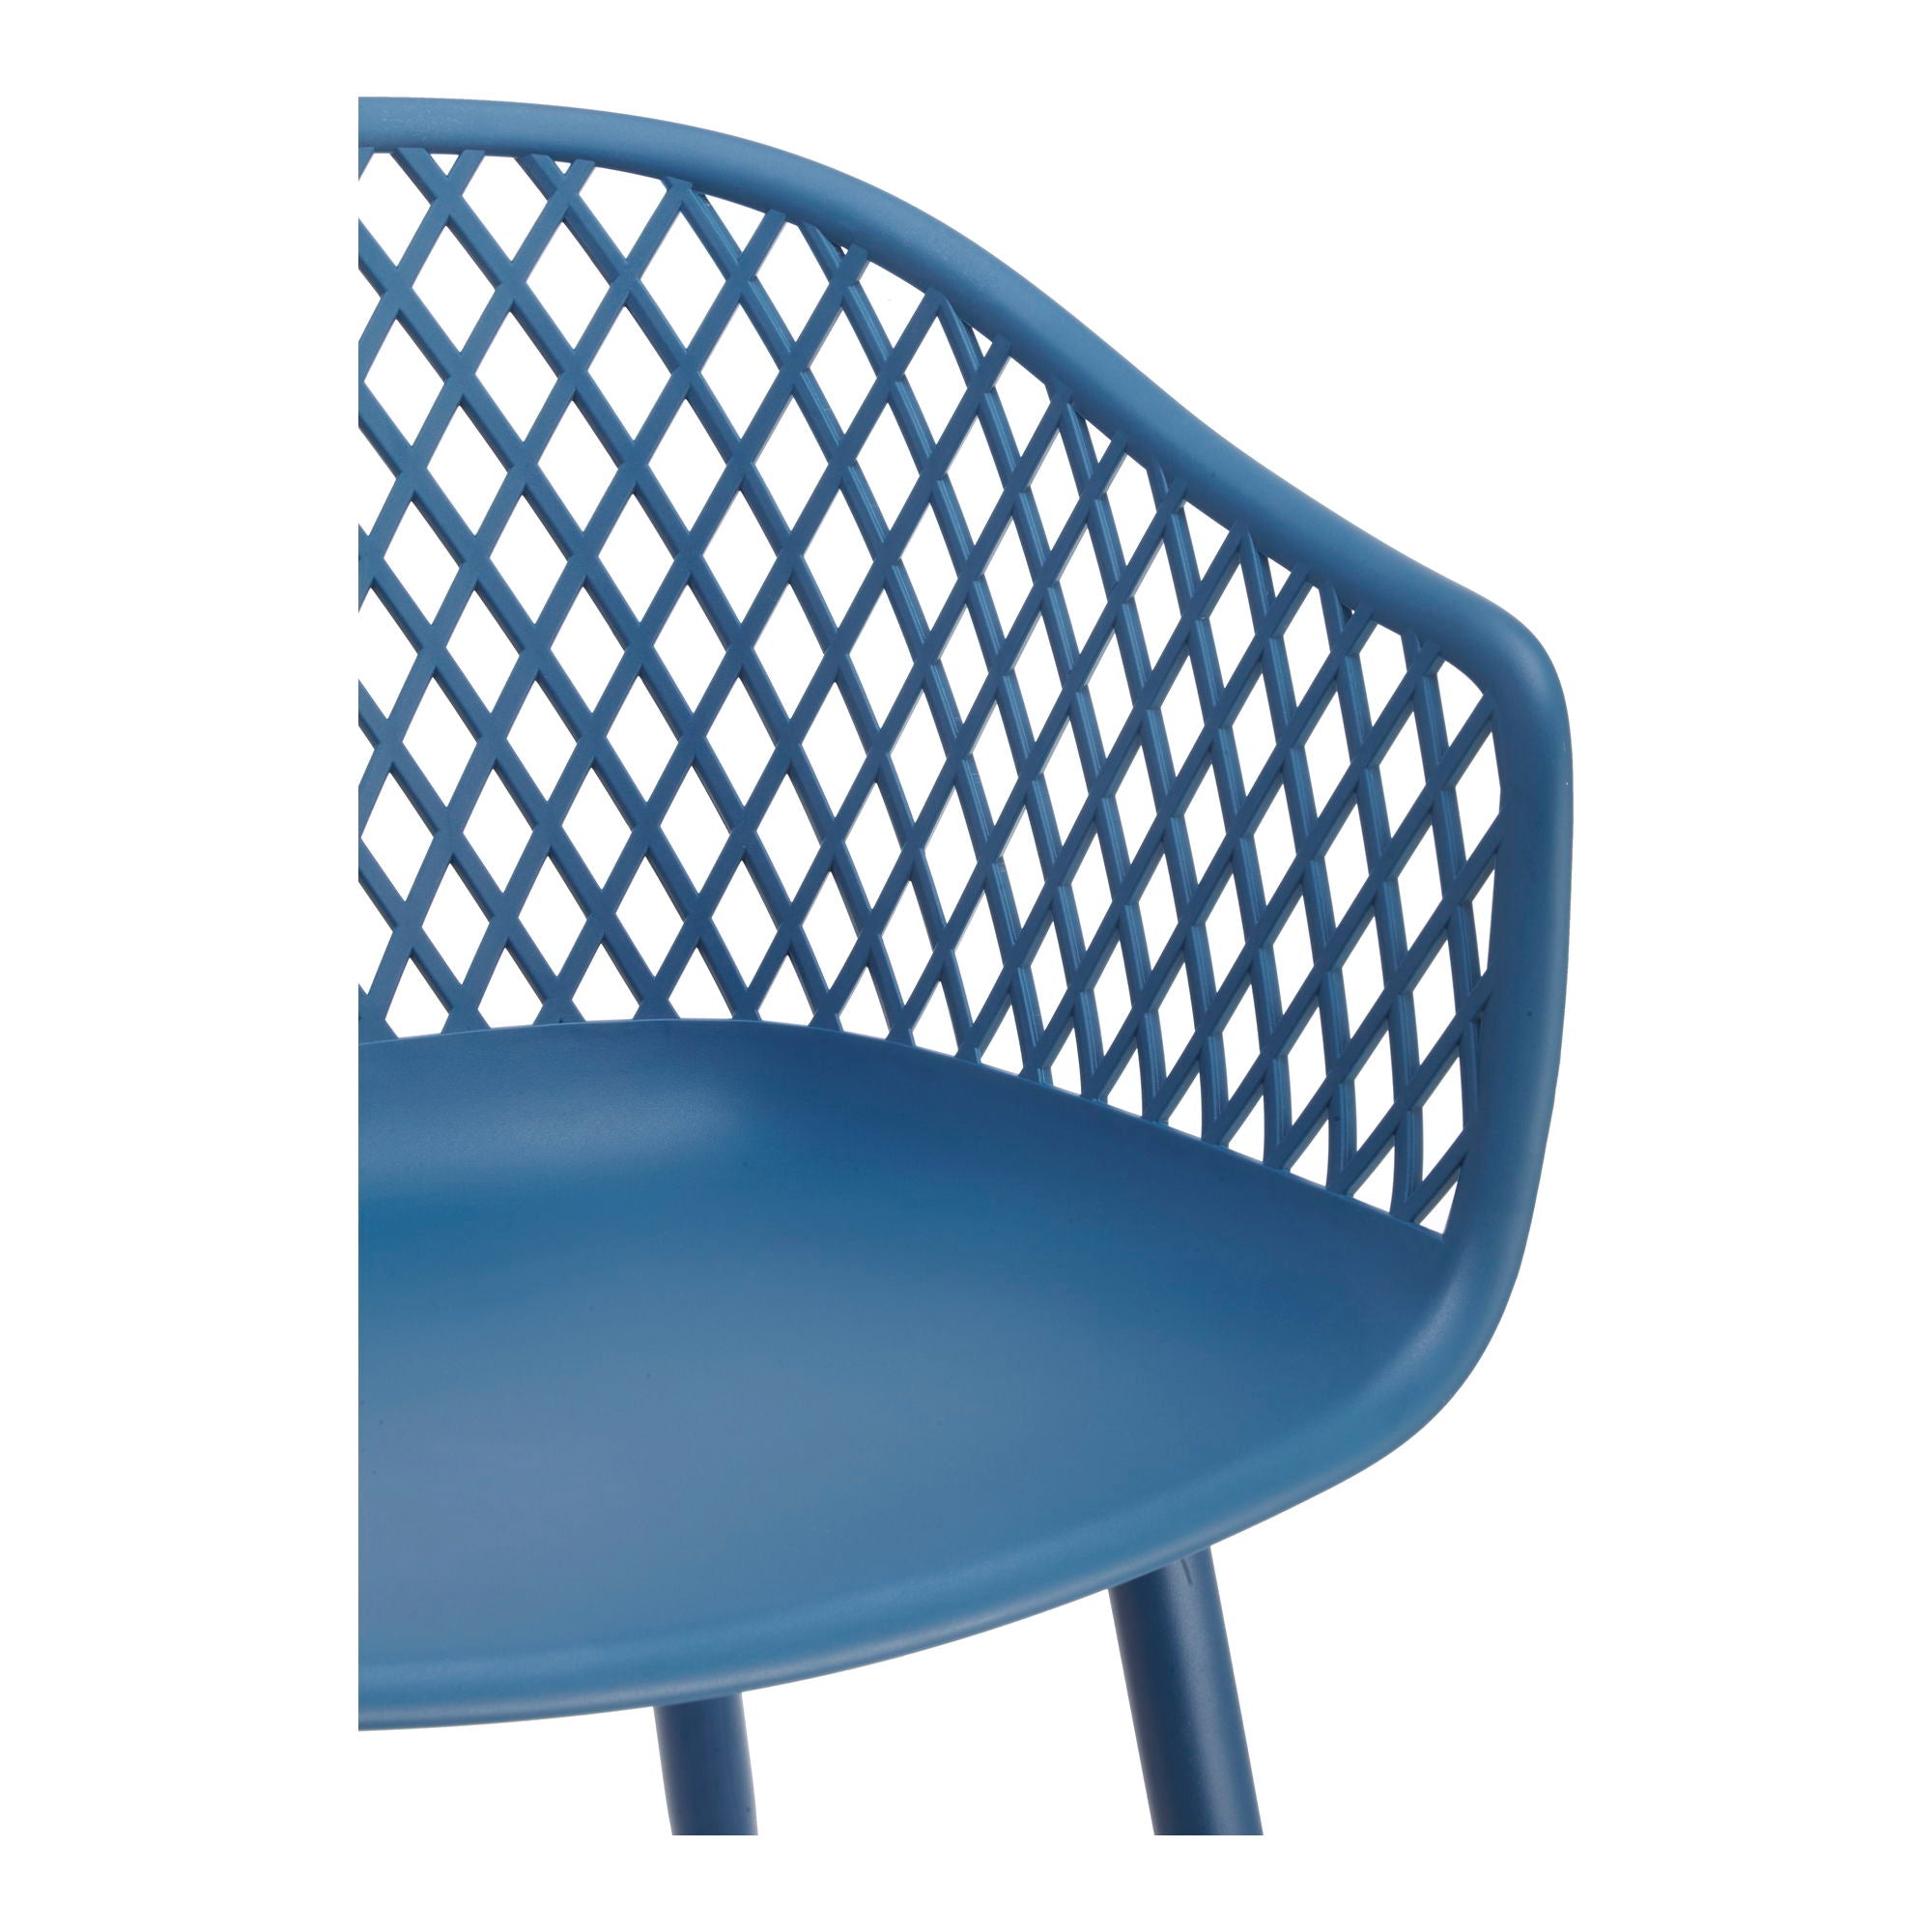 Piazza - Outdoor Chair - Blue - M2